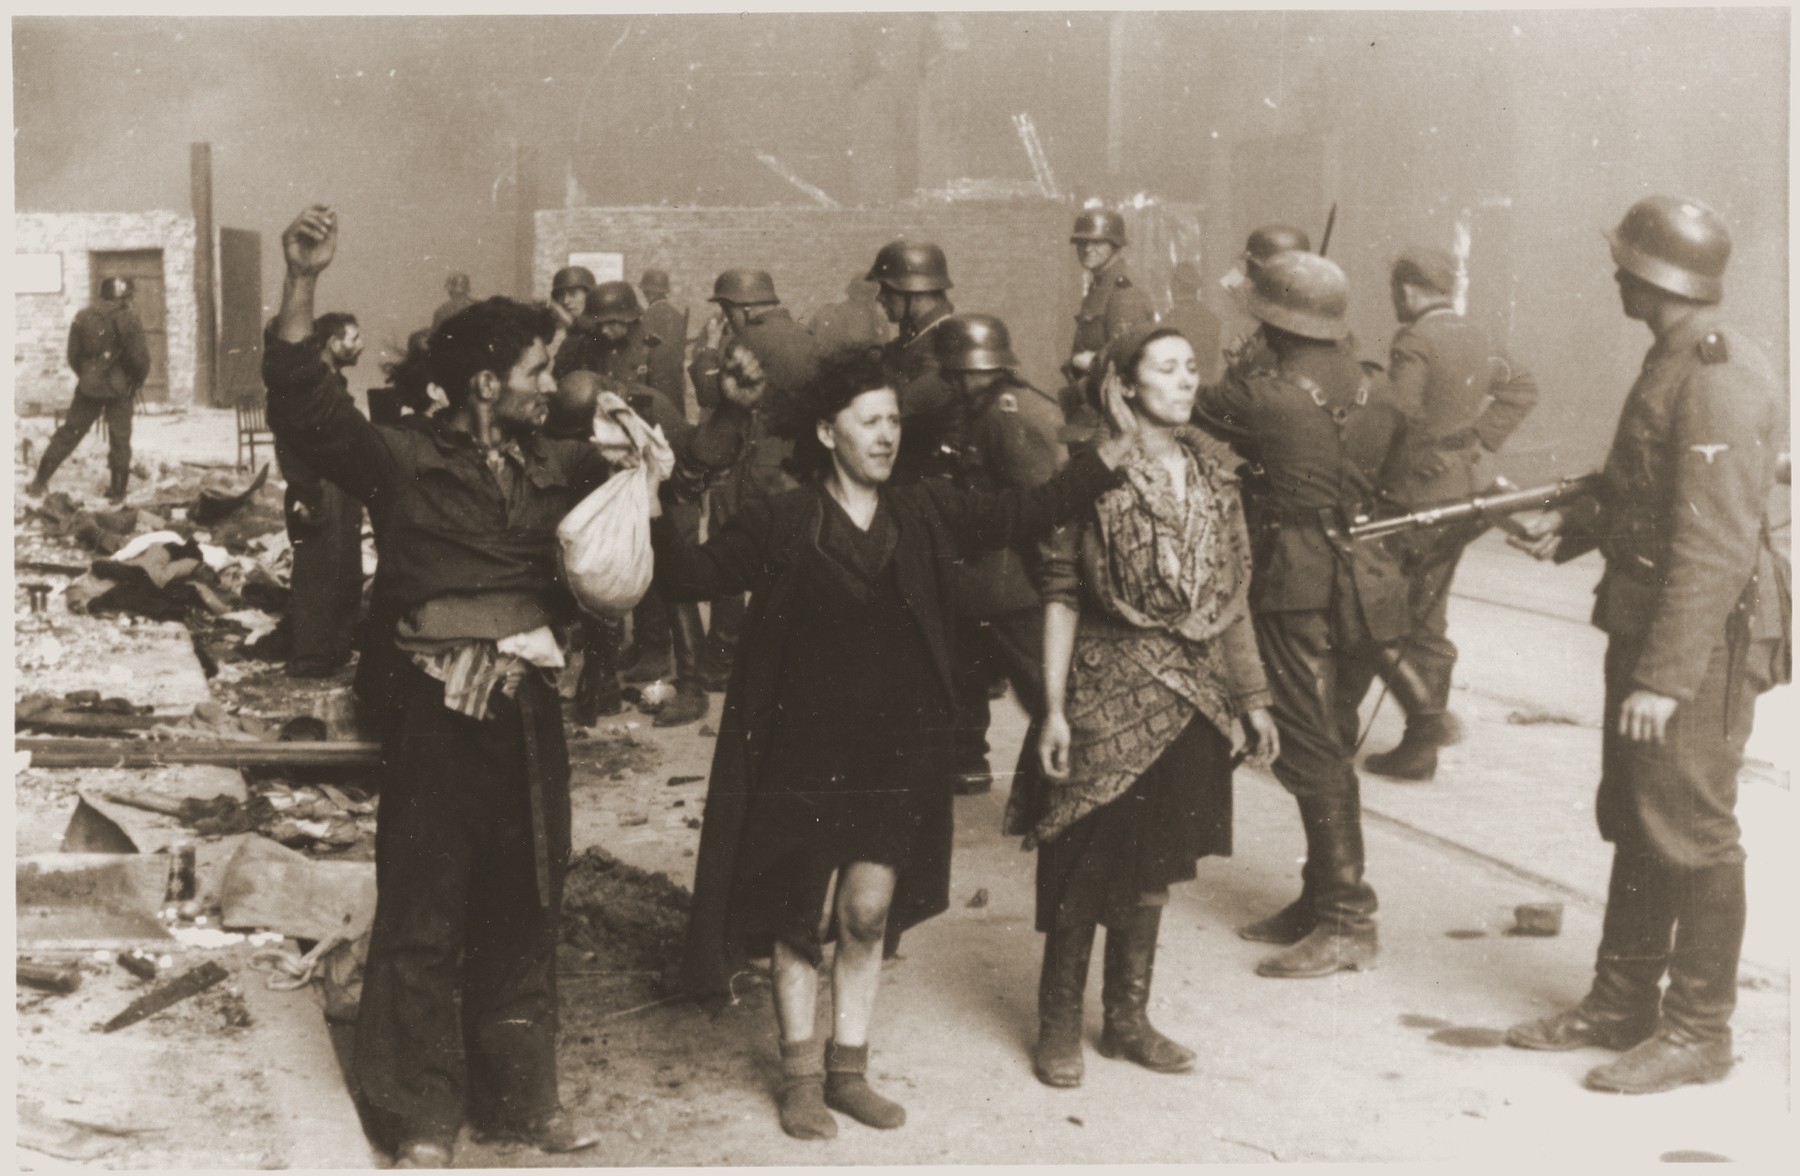 SS troops guard members of the Jewish resistance captured during the suppression of the Warsaw ghetto uprising.  The original German caption reads: "These bandits offered armed resistance."